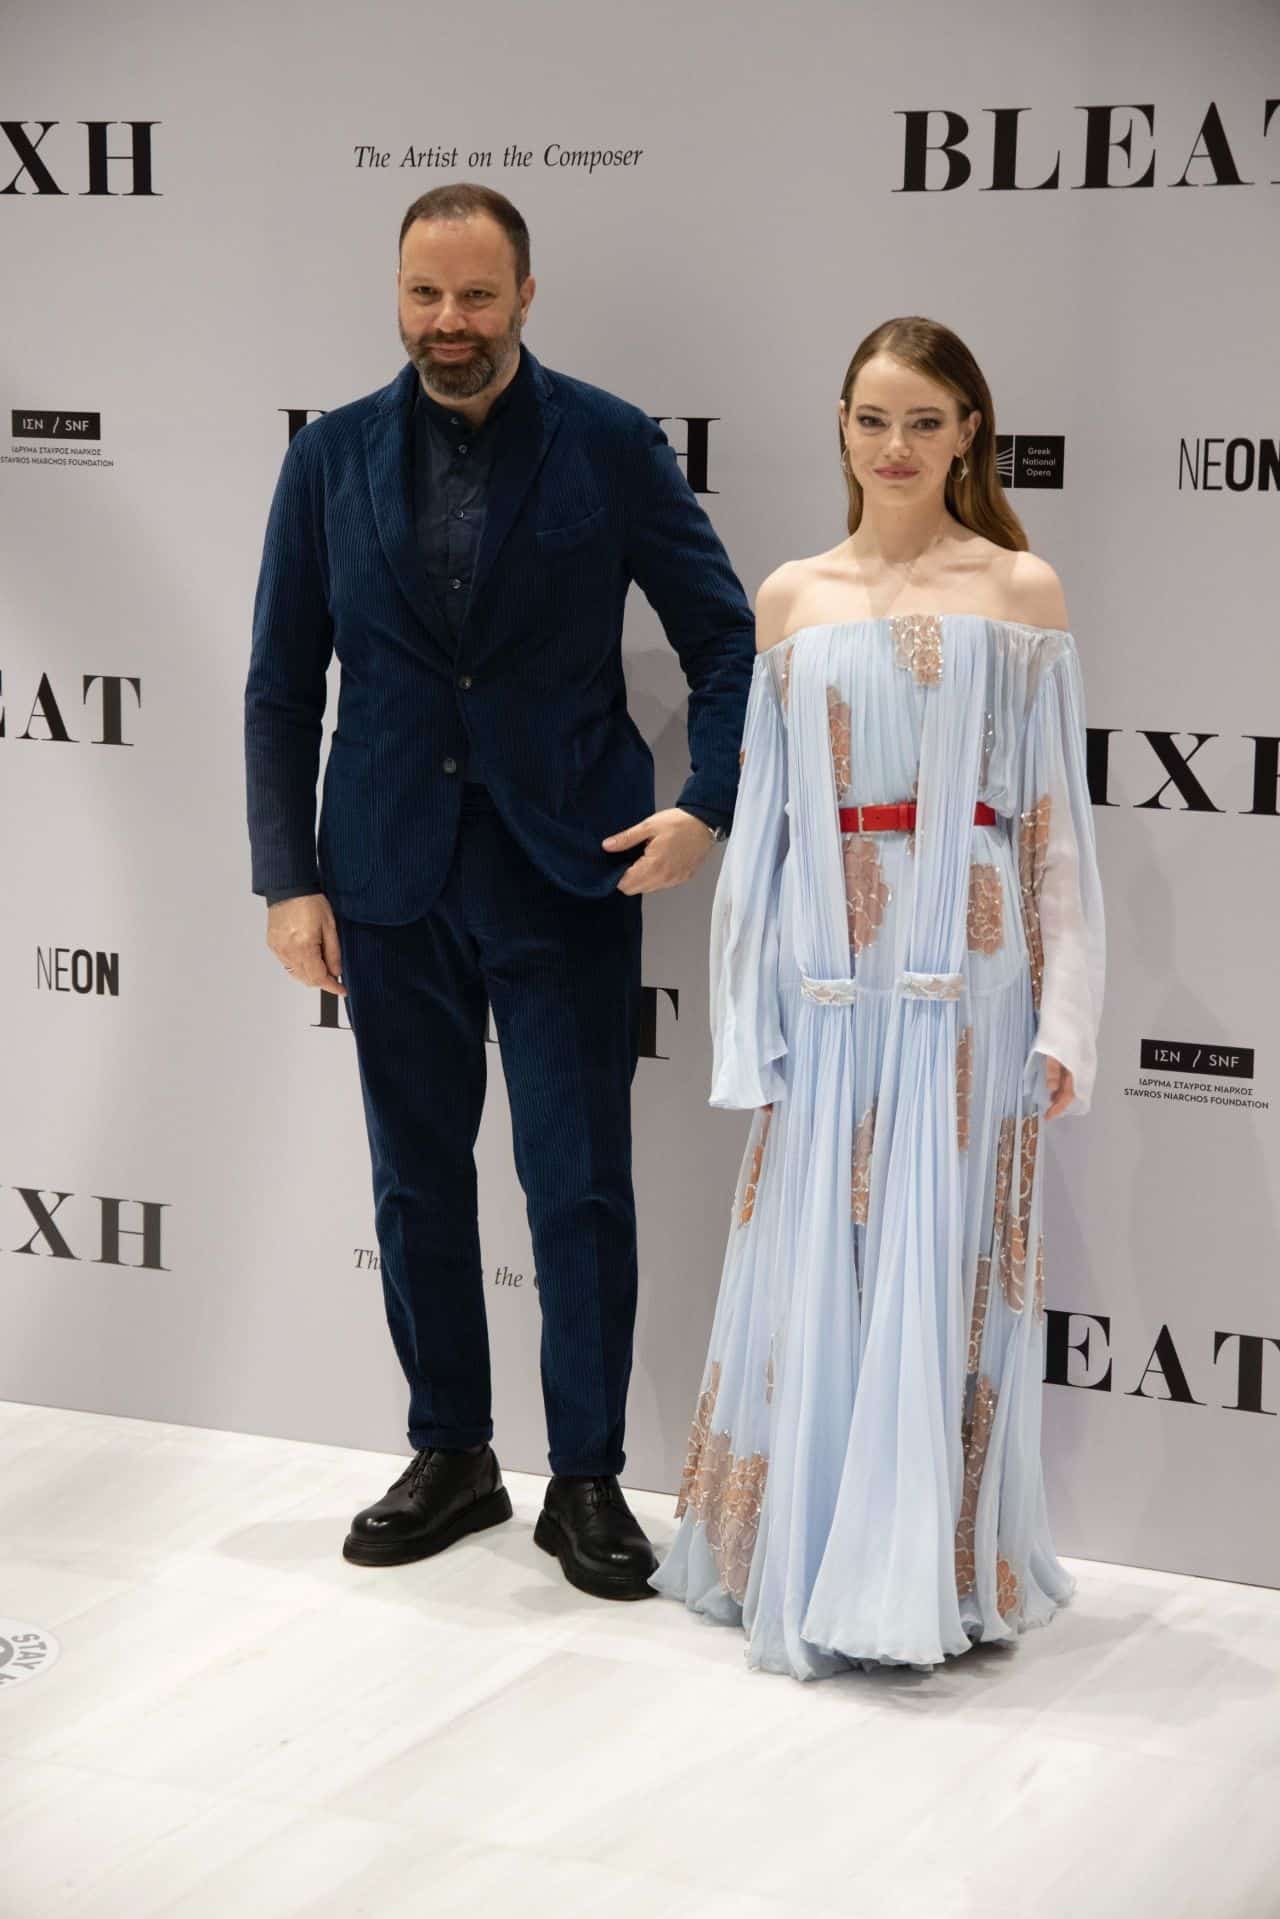 Emma Stone Stuns in a Pale Blue Dress at the Premiere of the Movie "Bleat"